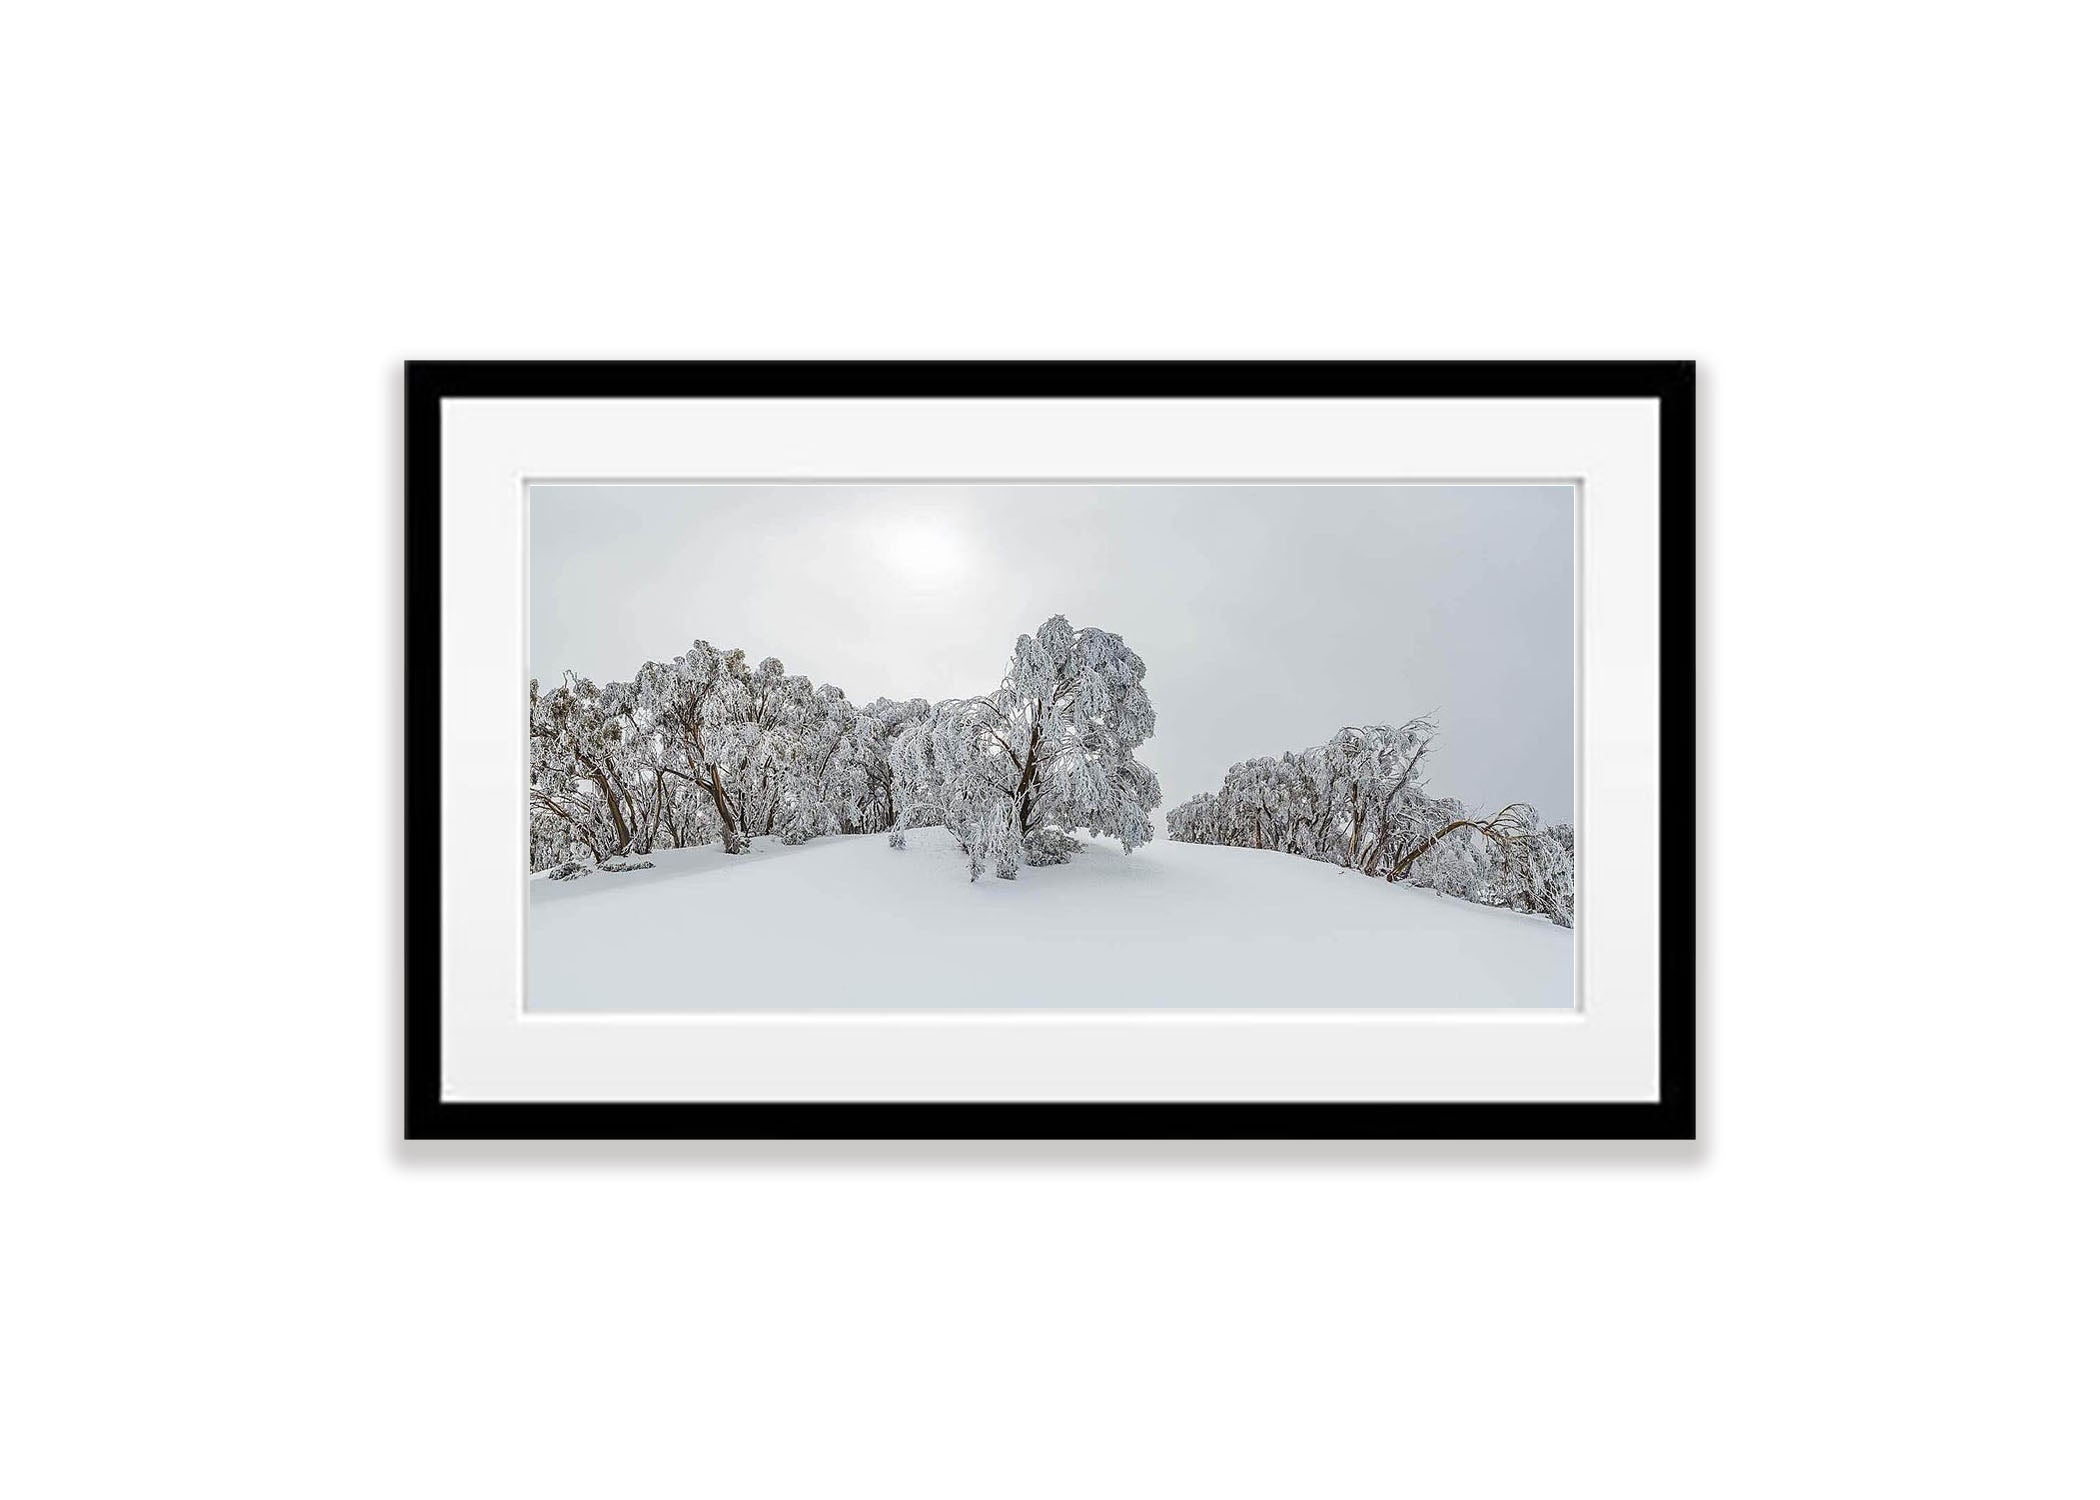 ARTWORK INSTOCK - Ice Tree, Mount Baw Baw - Victorian High Country - 150 x 50cms Canvas Raw Oak Print